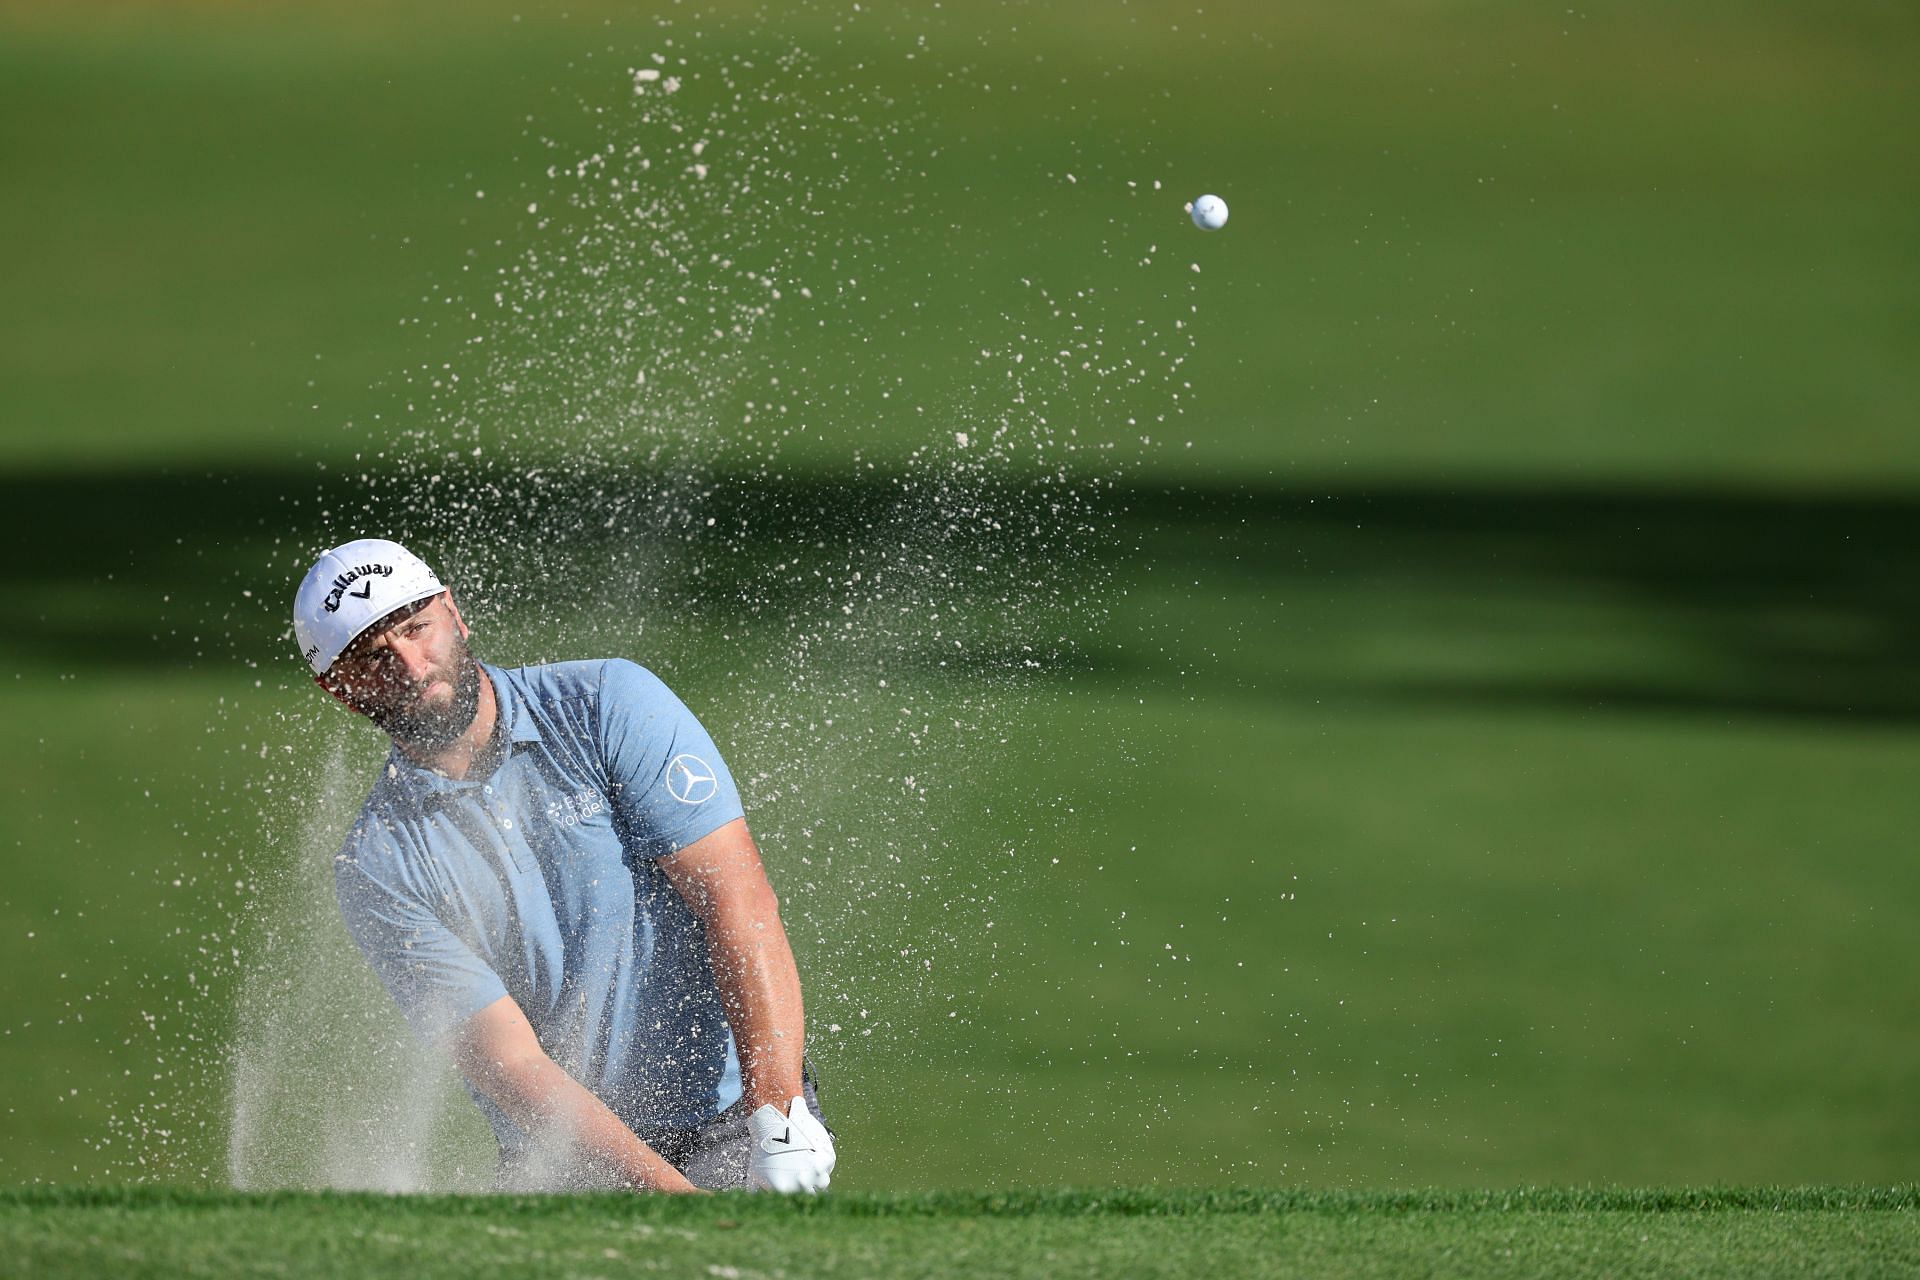 Can Jon Rahm make a comeback at the RBC Heritage? A look at the golfer